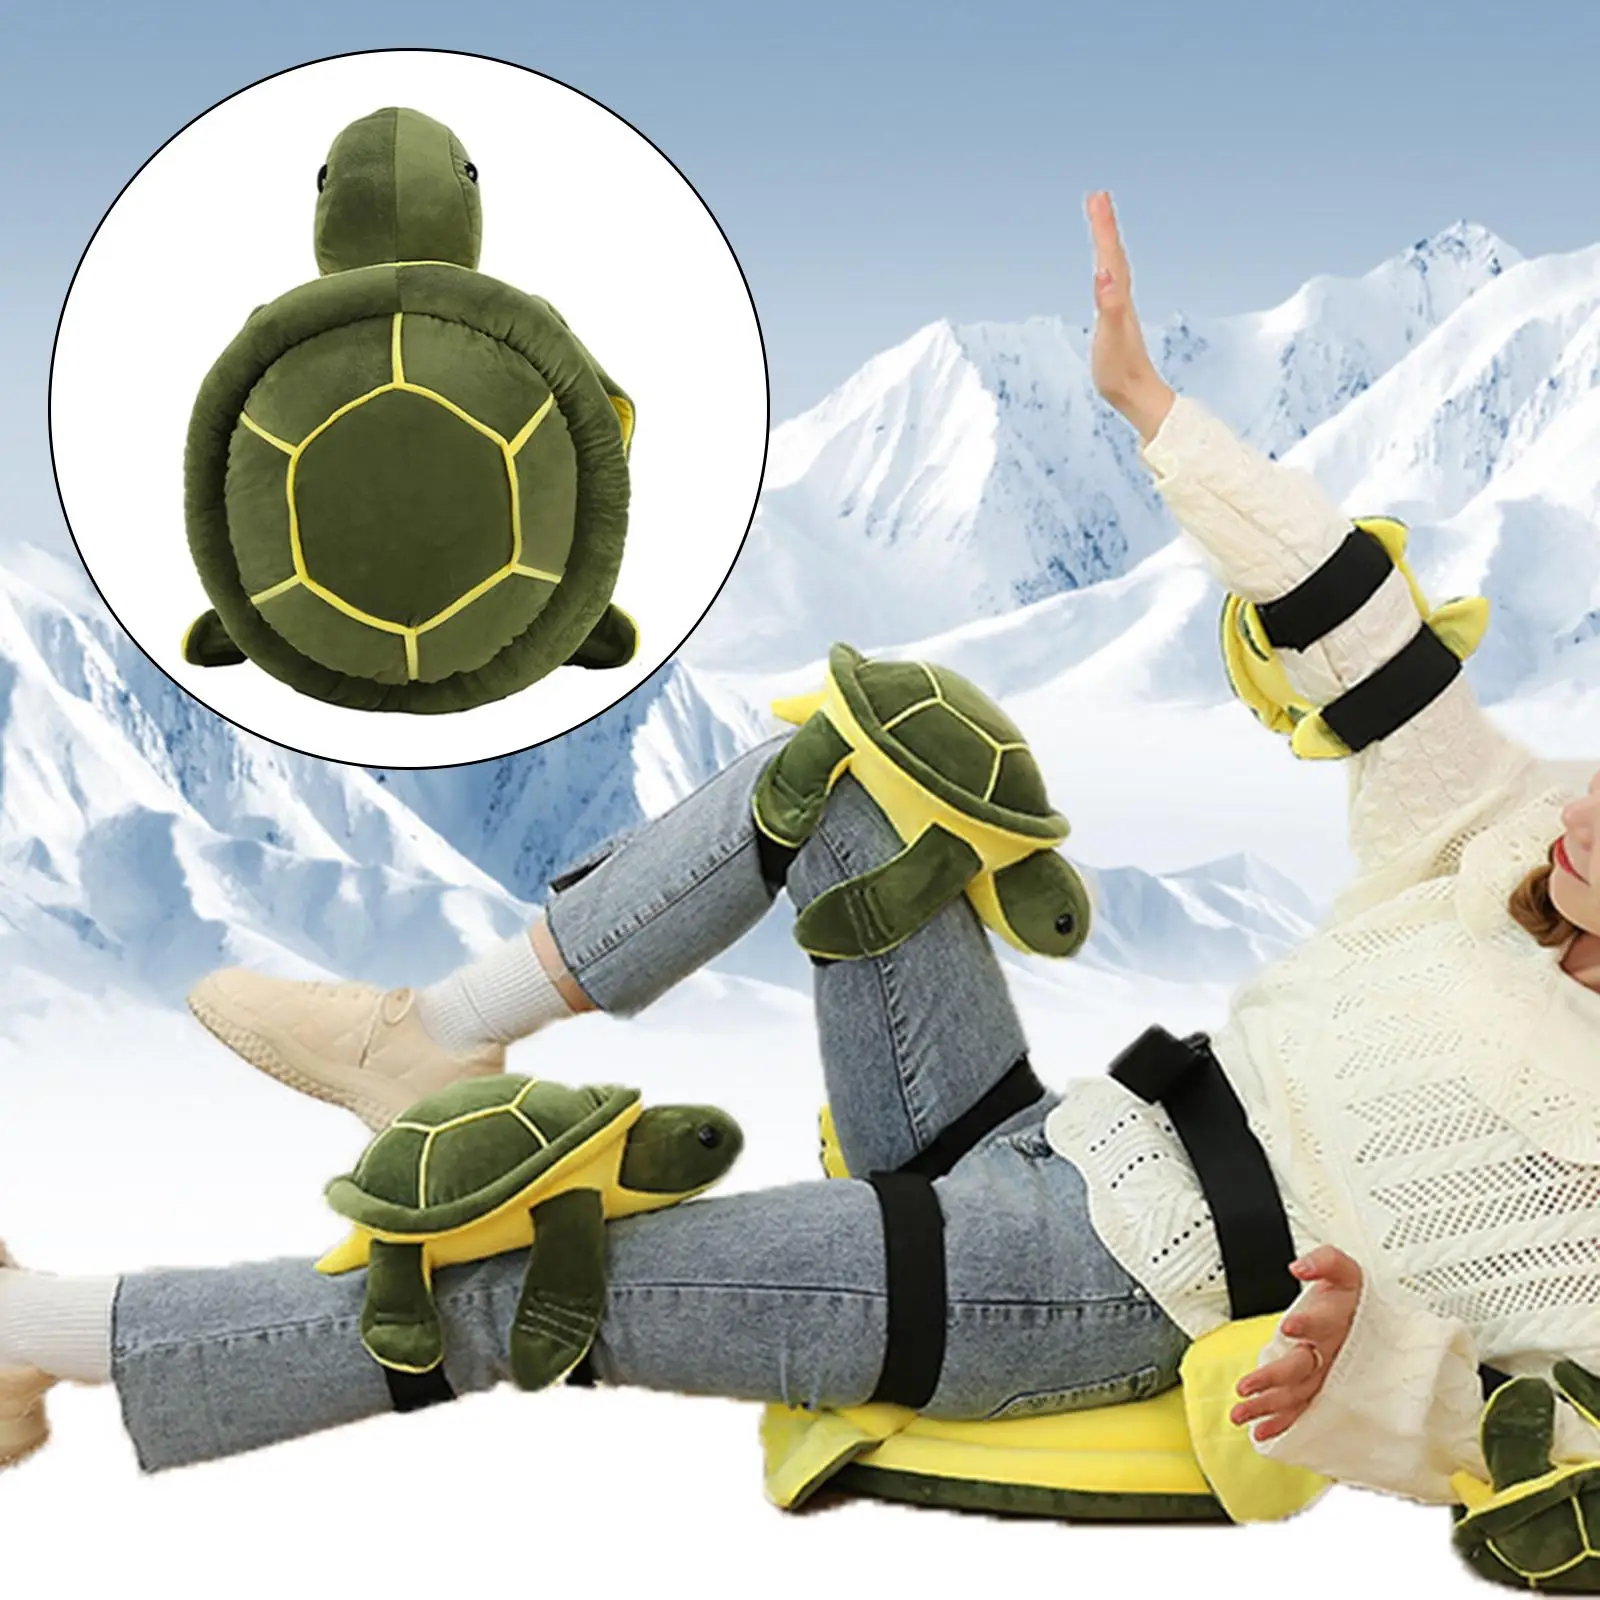 Outdoor Sports Skiing Protector Gear Gifts Supplies Adjustable Cushion Plush